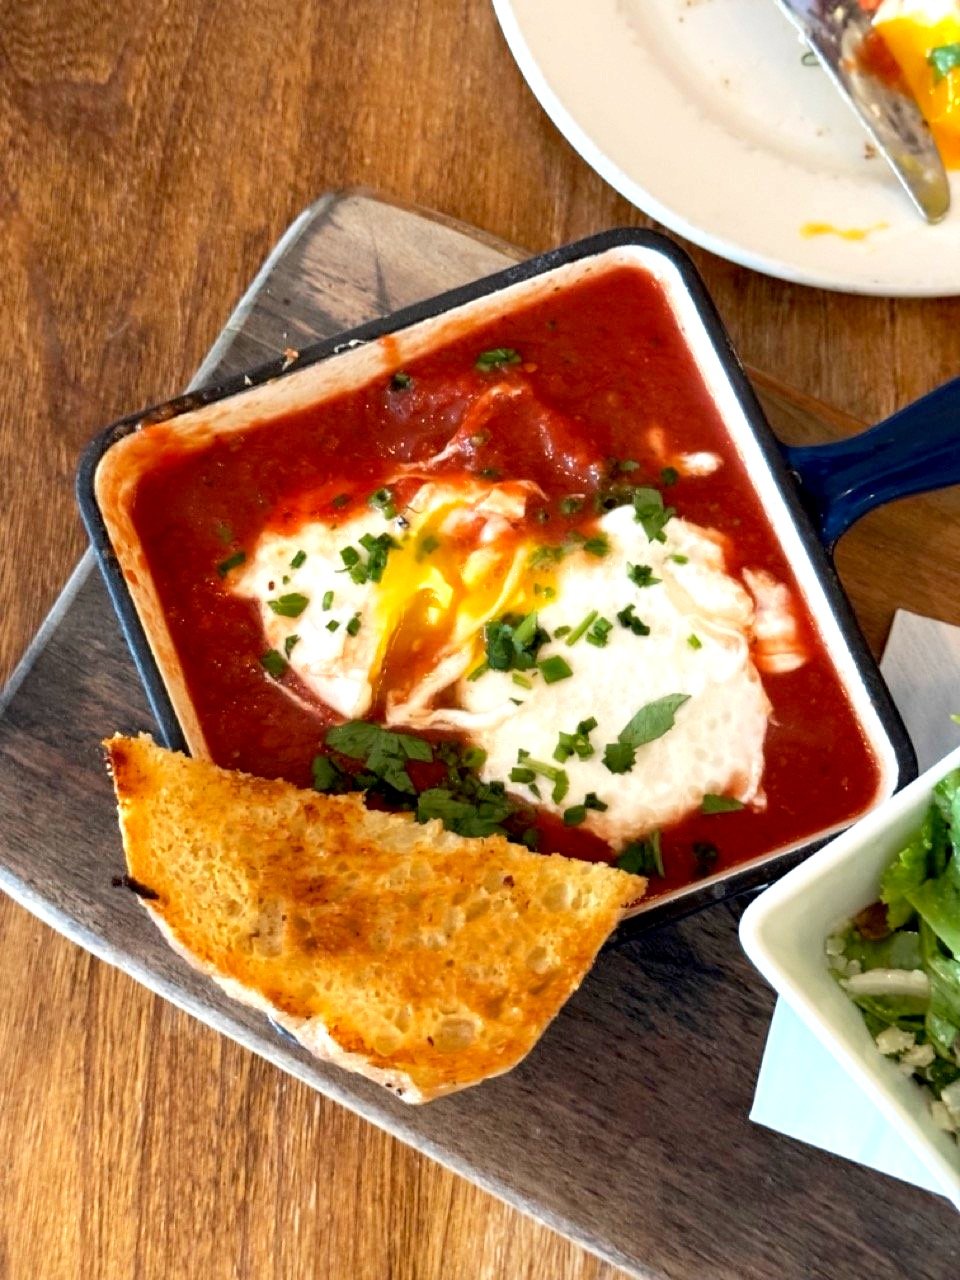 A rich start to the day with shakshuka for brunch from The Vine